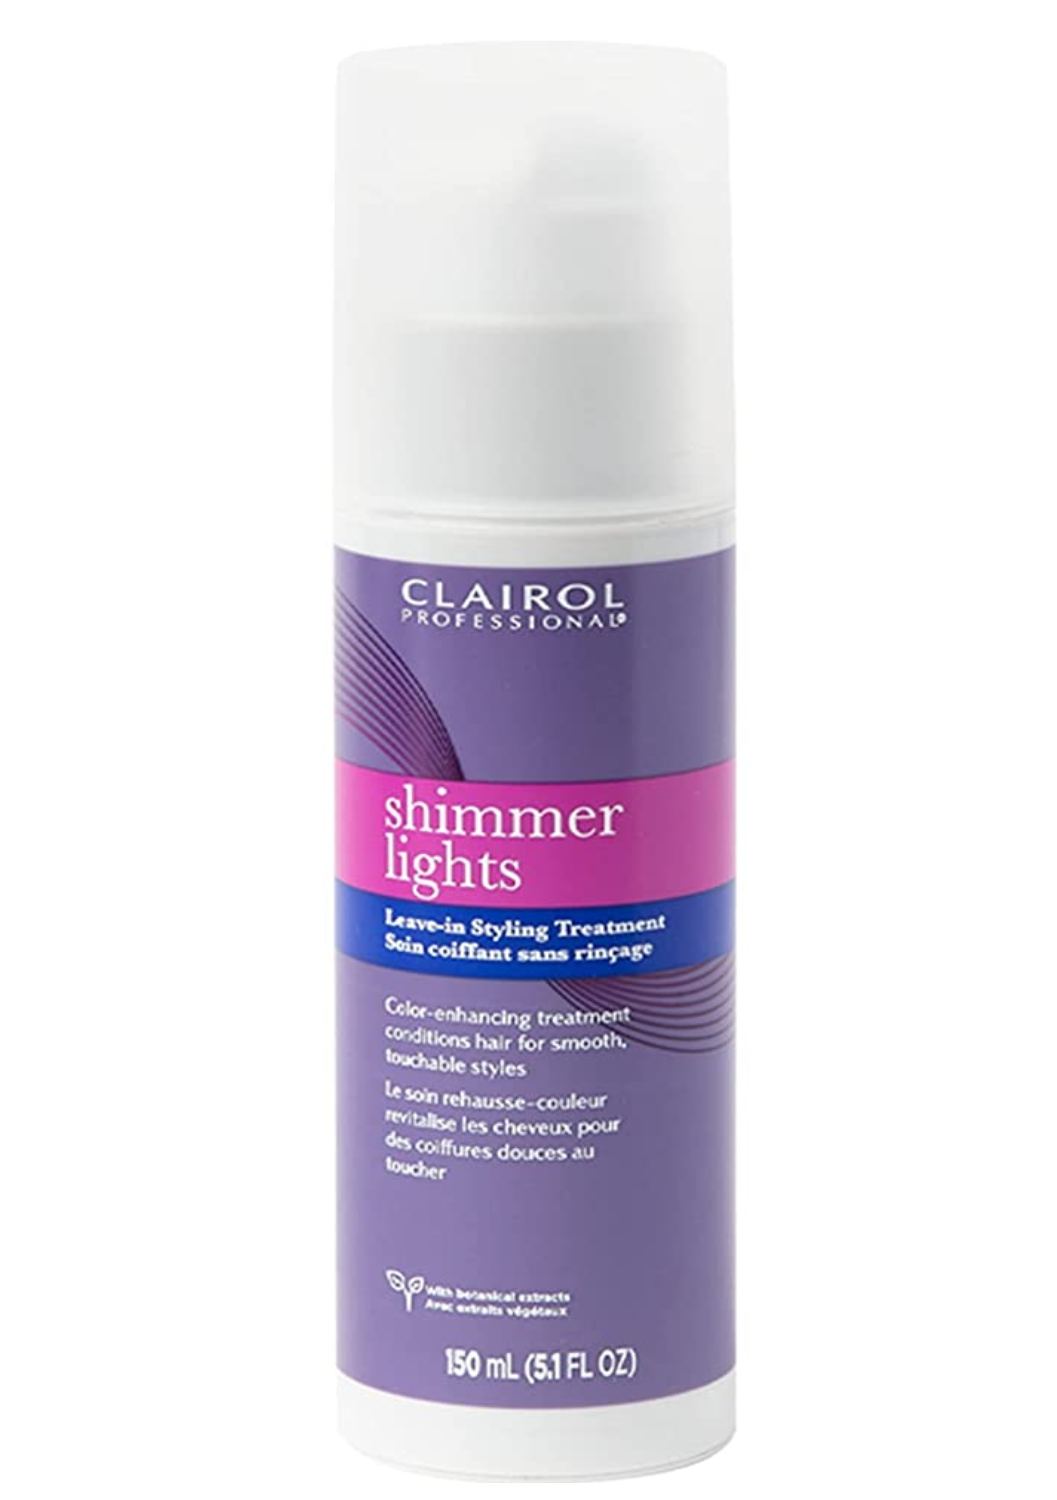 Primary image for Clairol Shimmer Lights Leave-in Styling Treatment, 5.1 fl oz